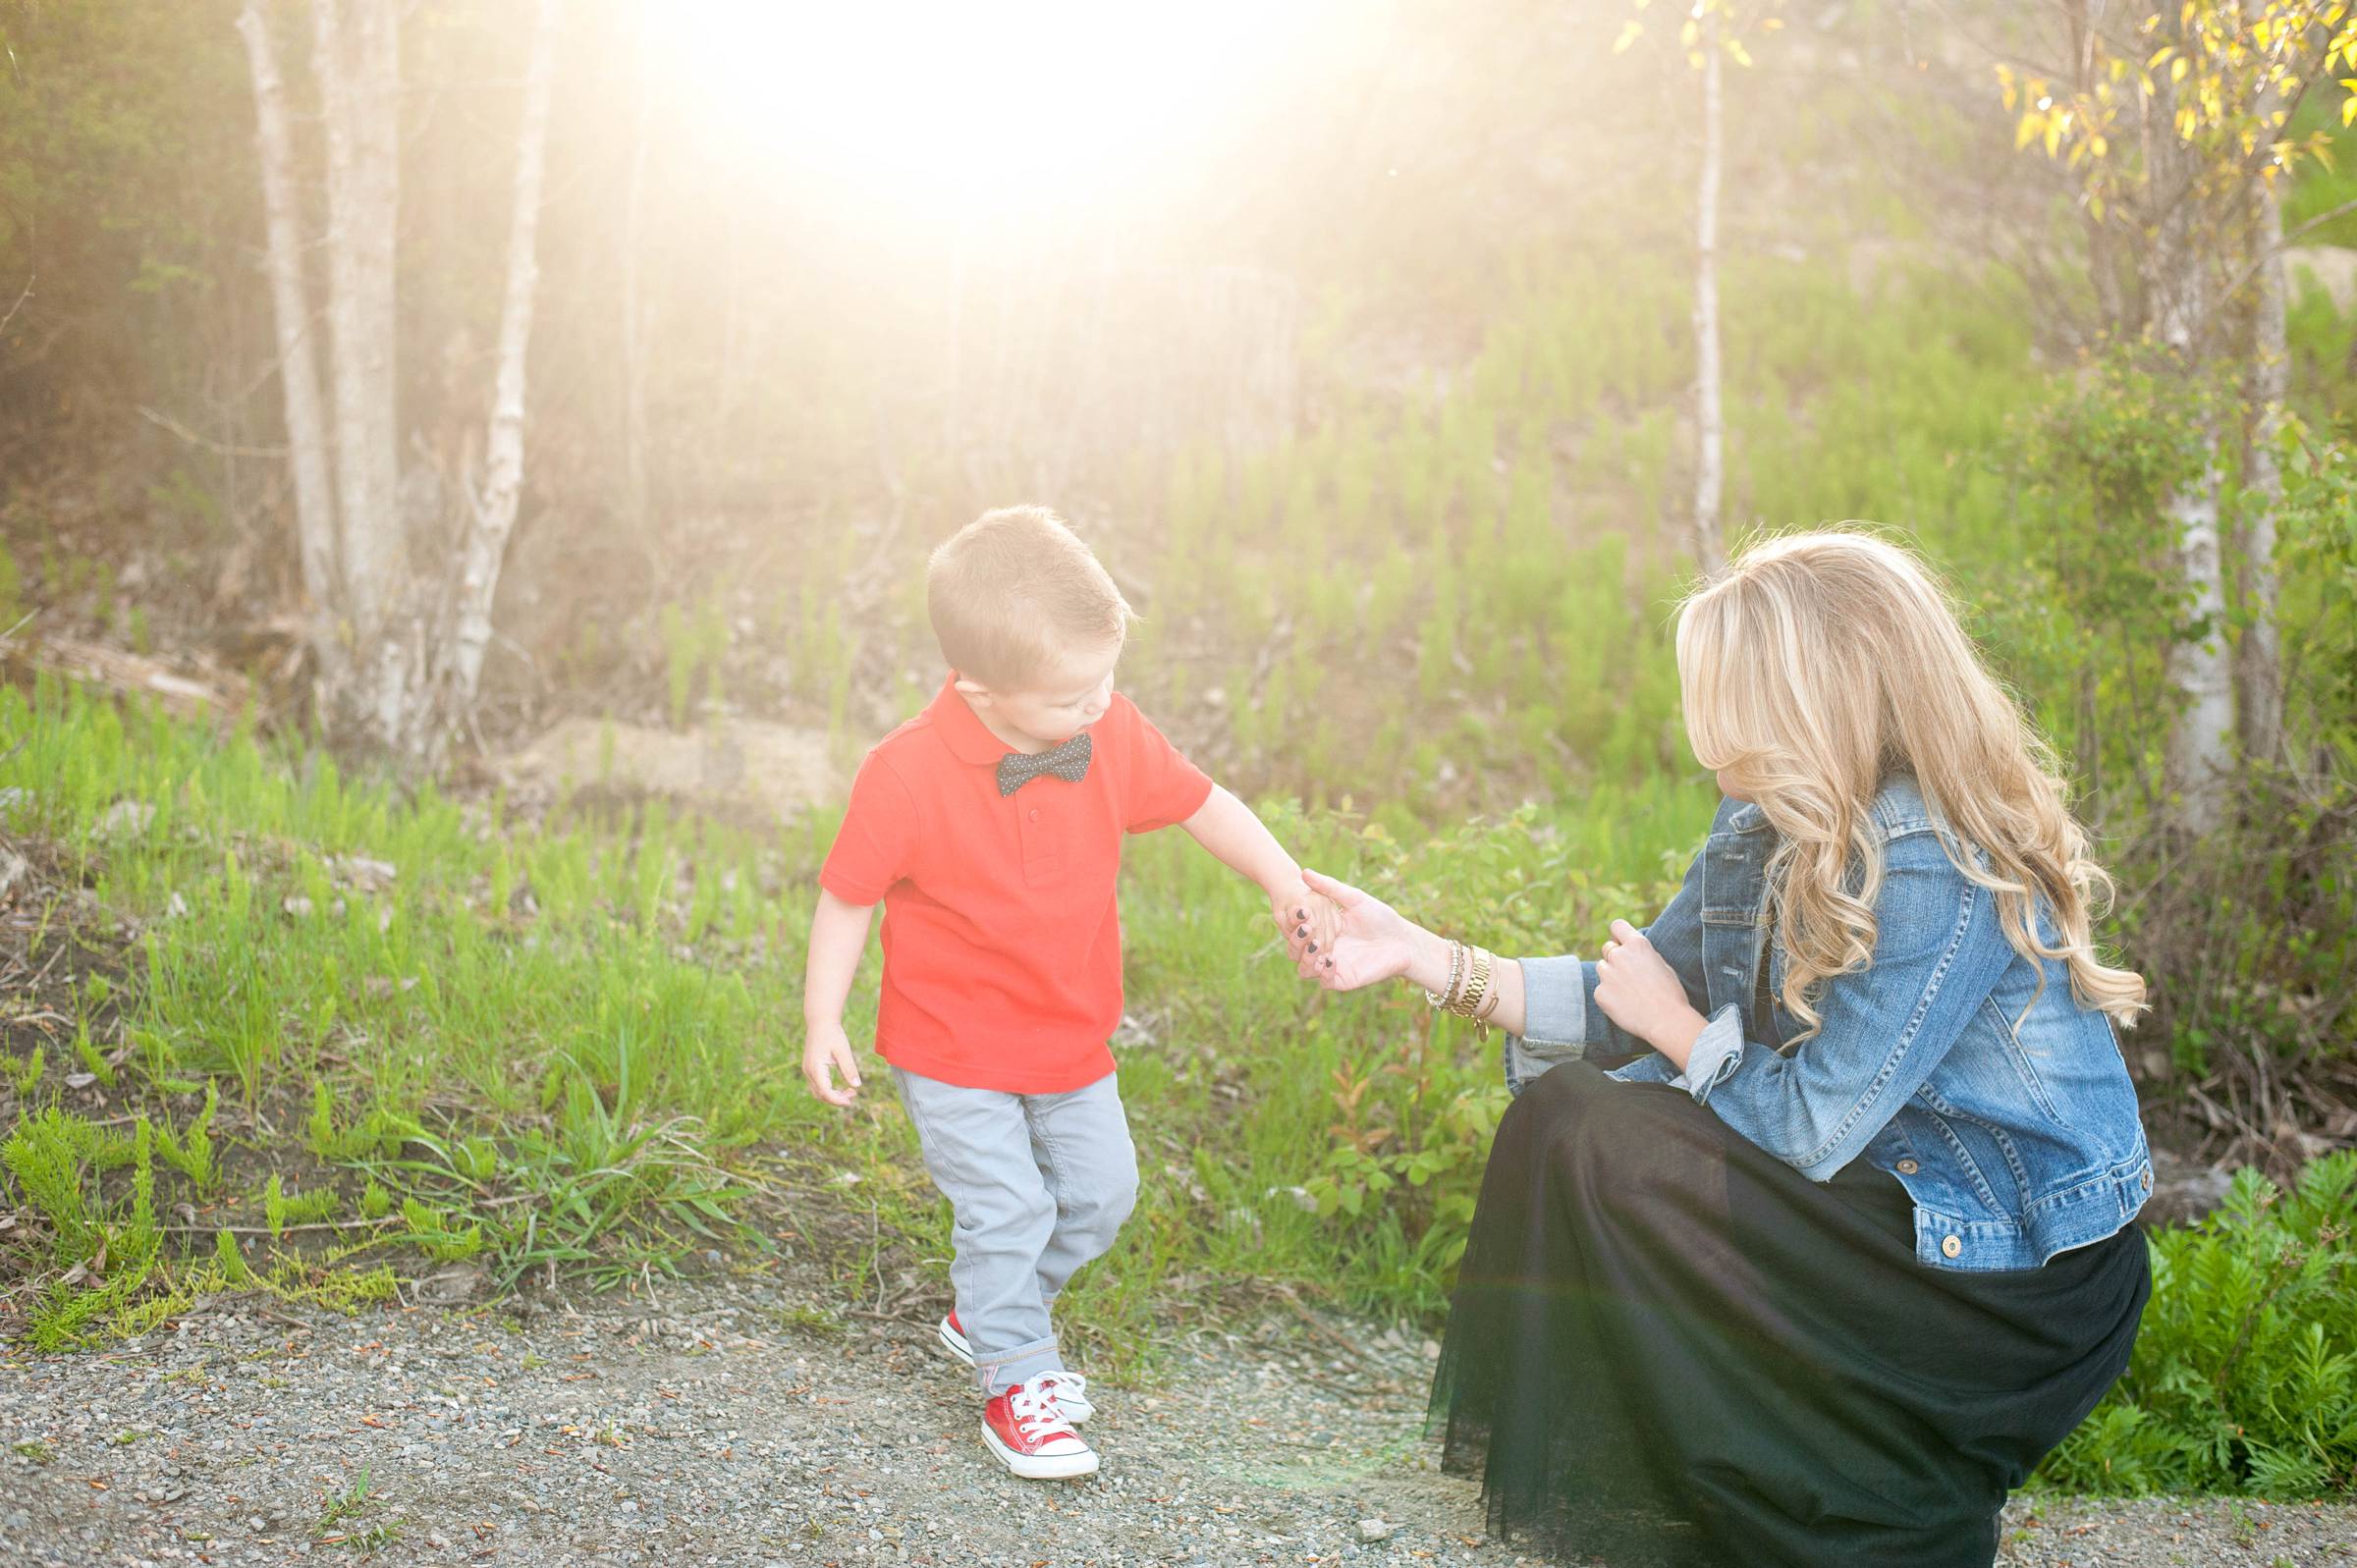 Janel-Gion-Photography-and-Design-Mommy-and-Me-Summer-Photo-Session-Sandpoint-Idaho_0005.jpg